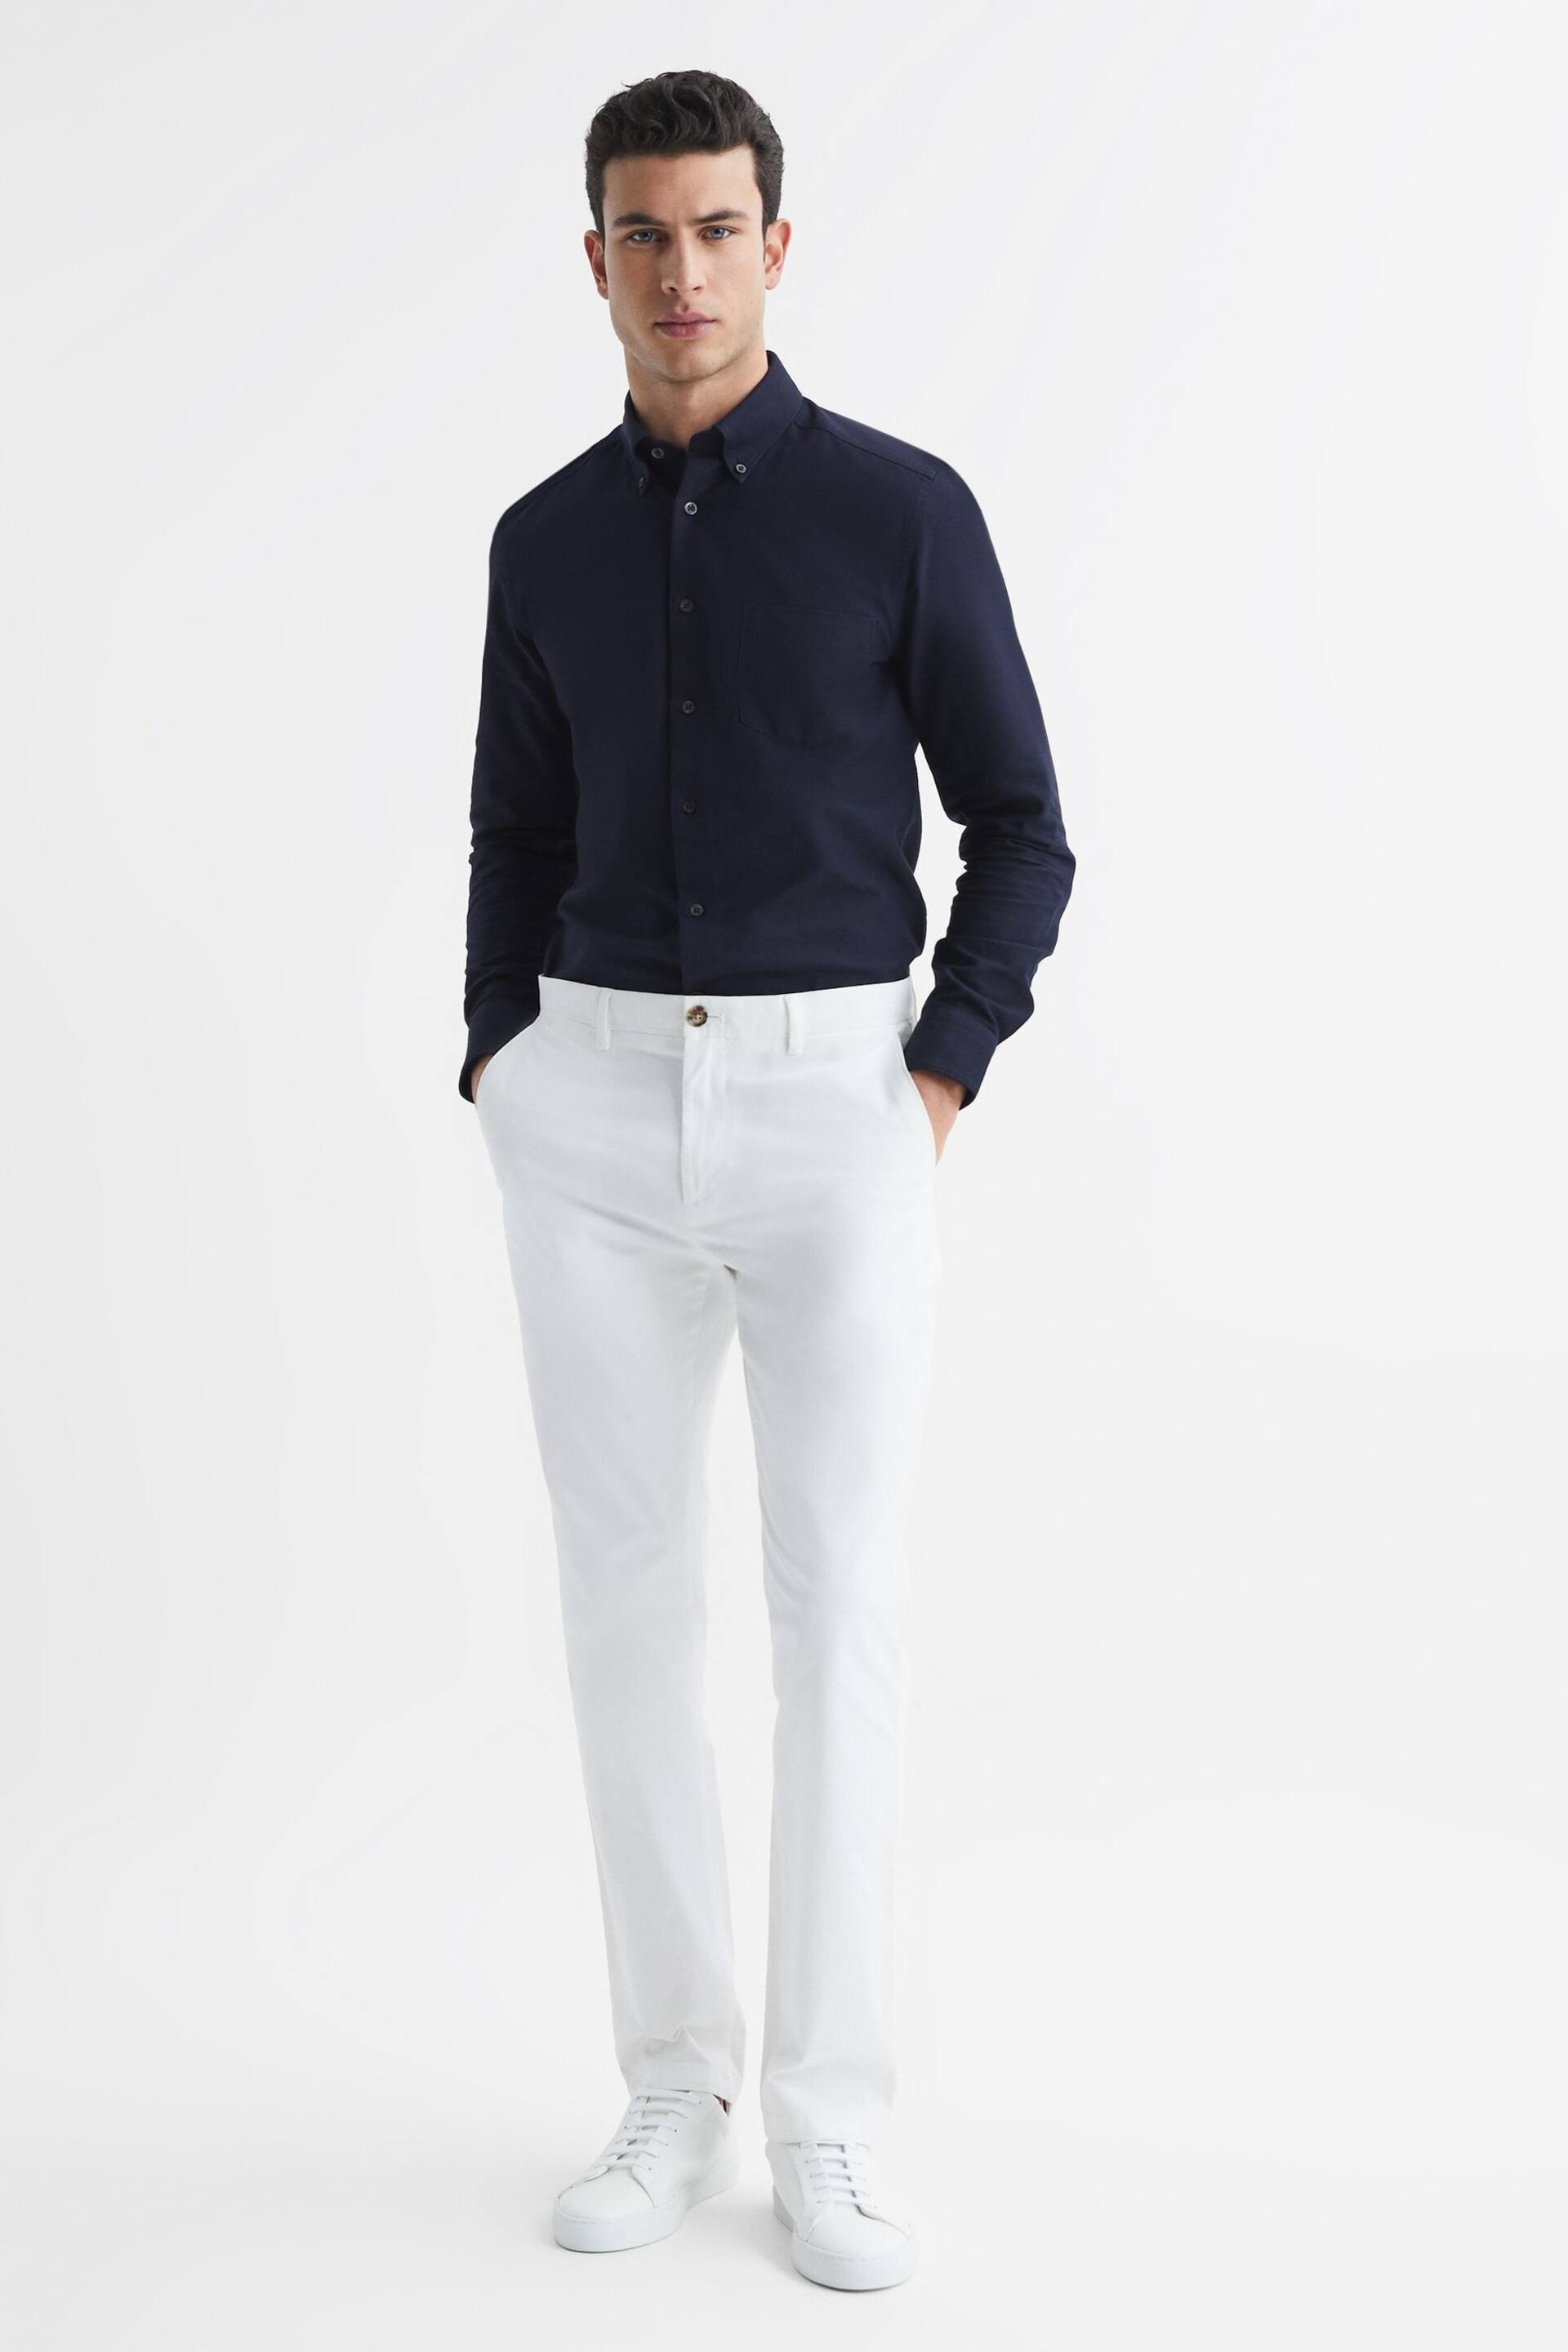 Reiss Navy Greenwich Slim Fit Cotton Oxford Shirt - Image 3 of 8